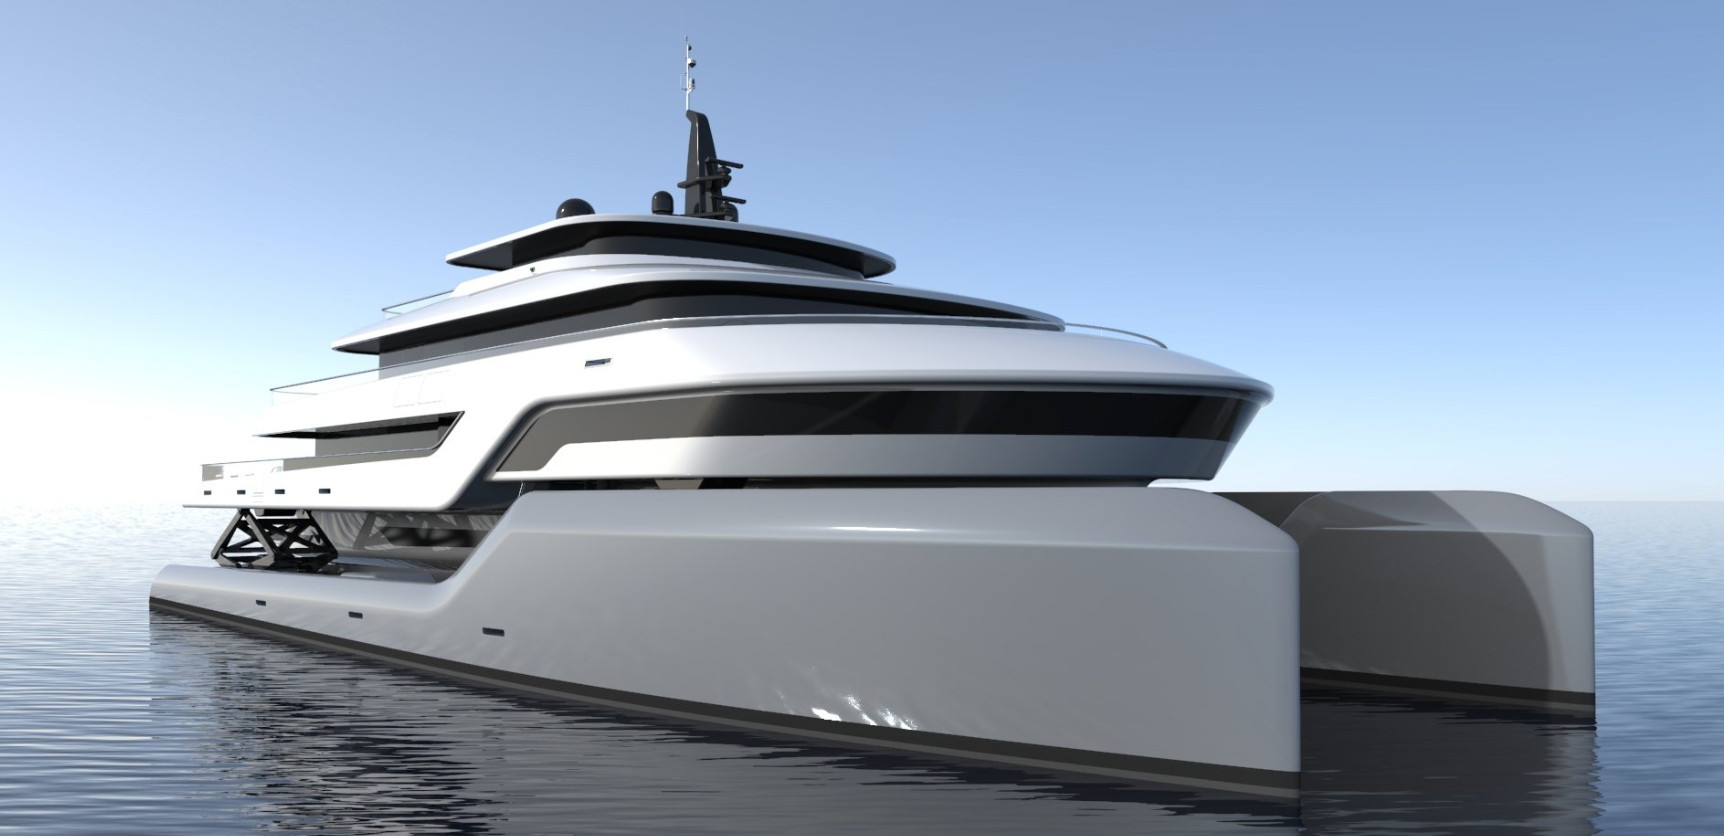 Render of a servo yacht equipped with the anti seasickness technology